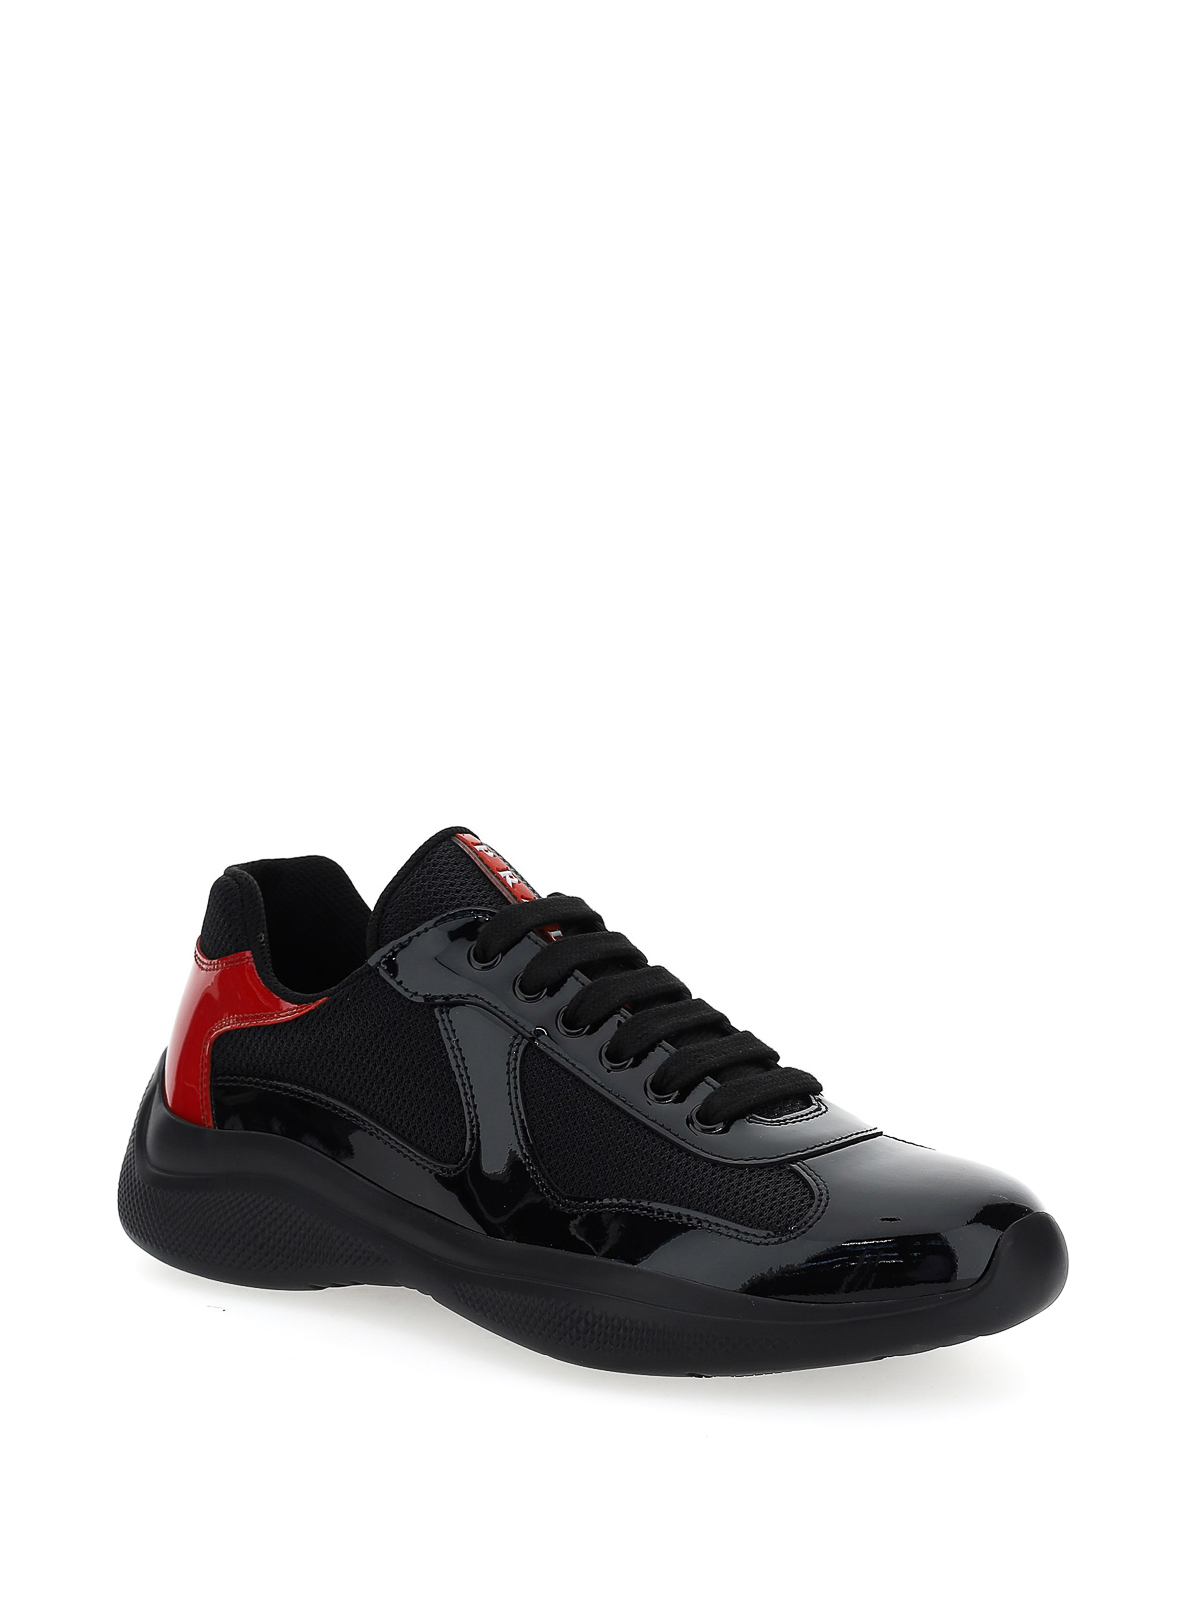 Prada Linea Rossa - New American's Cup sneakers - trainers ...